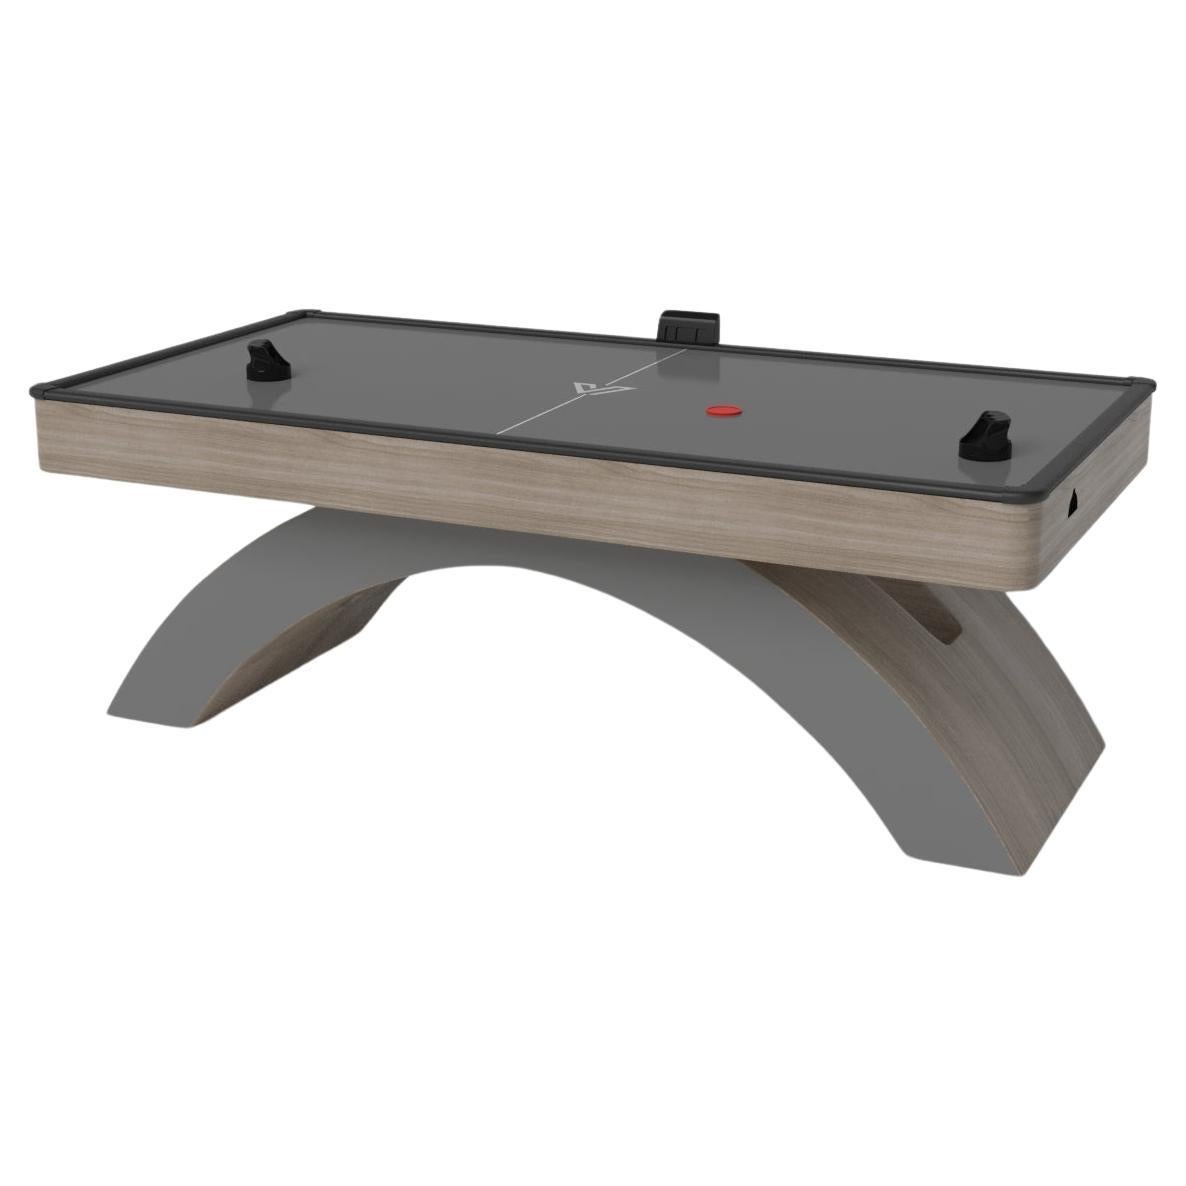 Elevate Customs Zenith Air Hockey Tables /Solid White Oak Wood in 7'-Made in USA